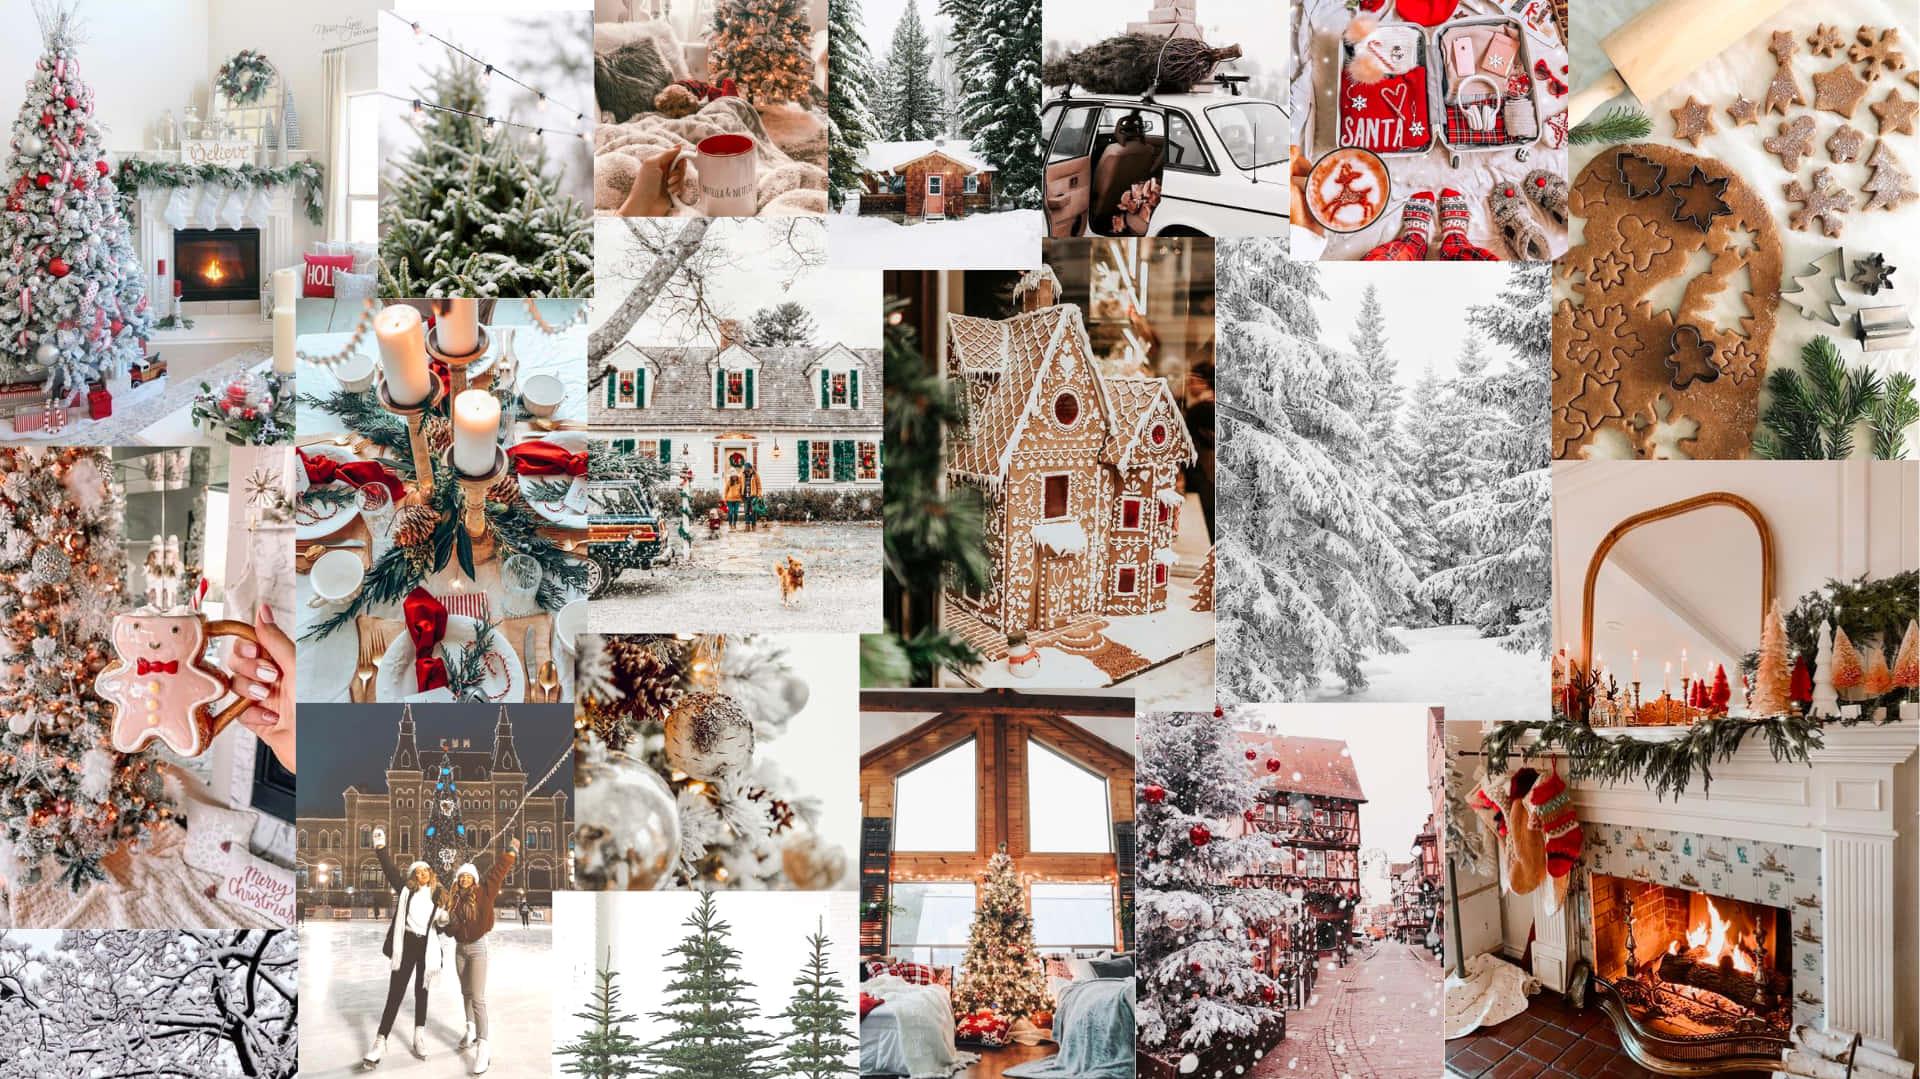 Download Christmas Collage With Christmas Trees And Decorations